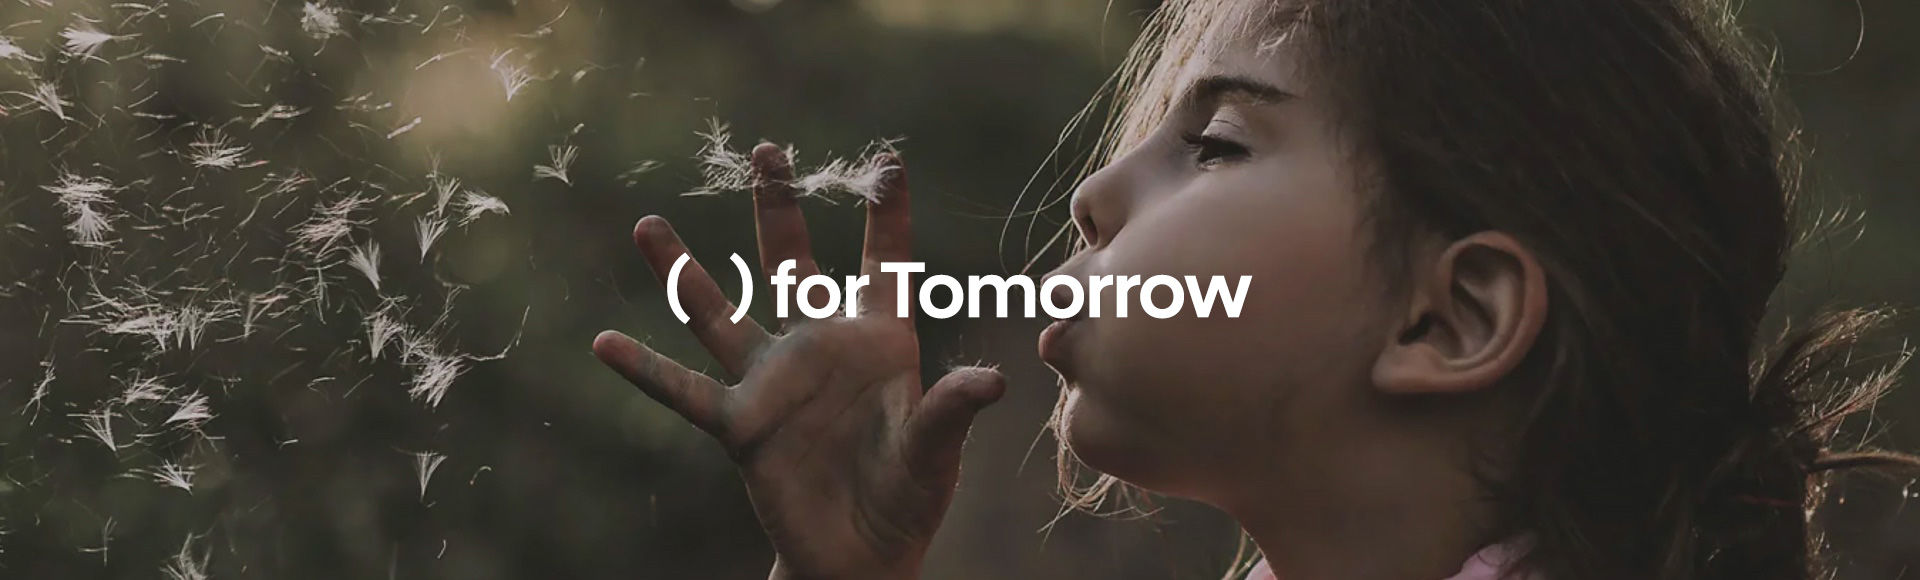 A young girl with brown hair blows a dandelion seed head. The white text reads “( ) for Tomorrow.” 